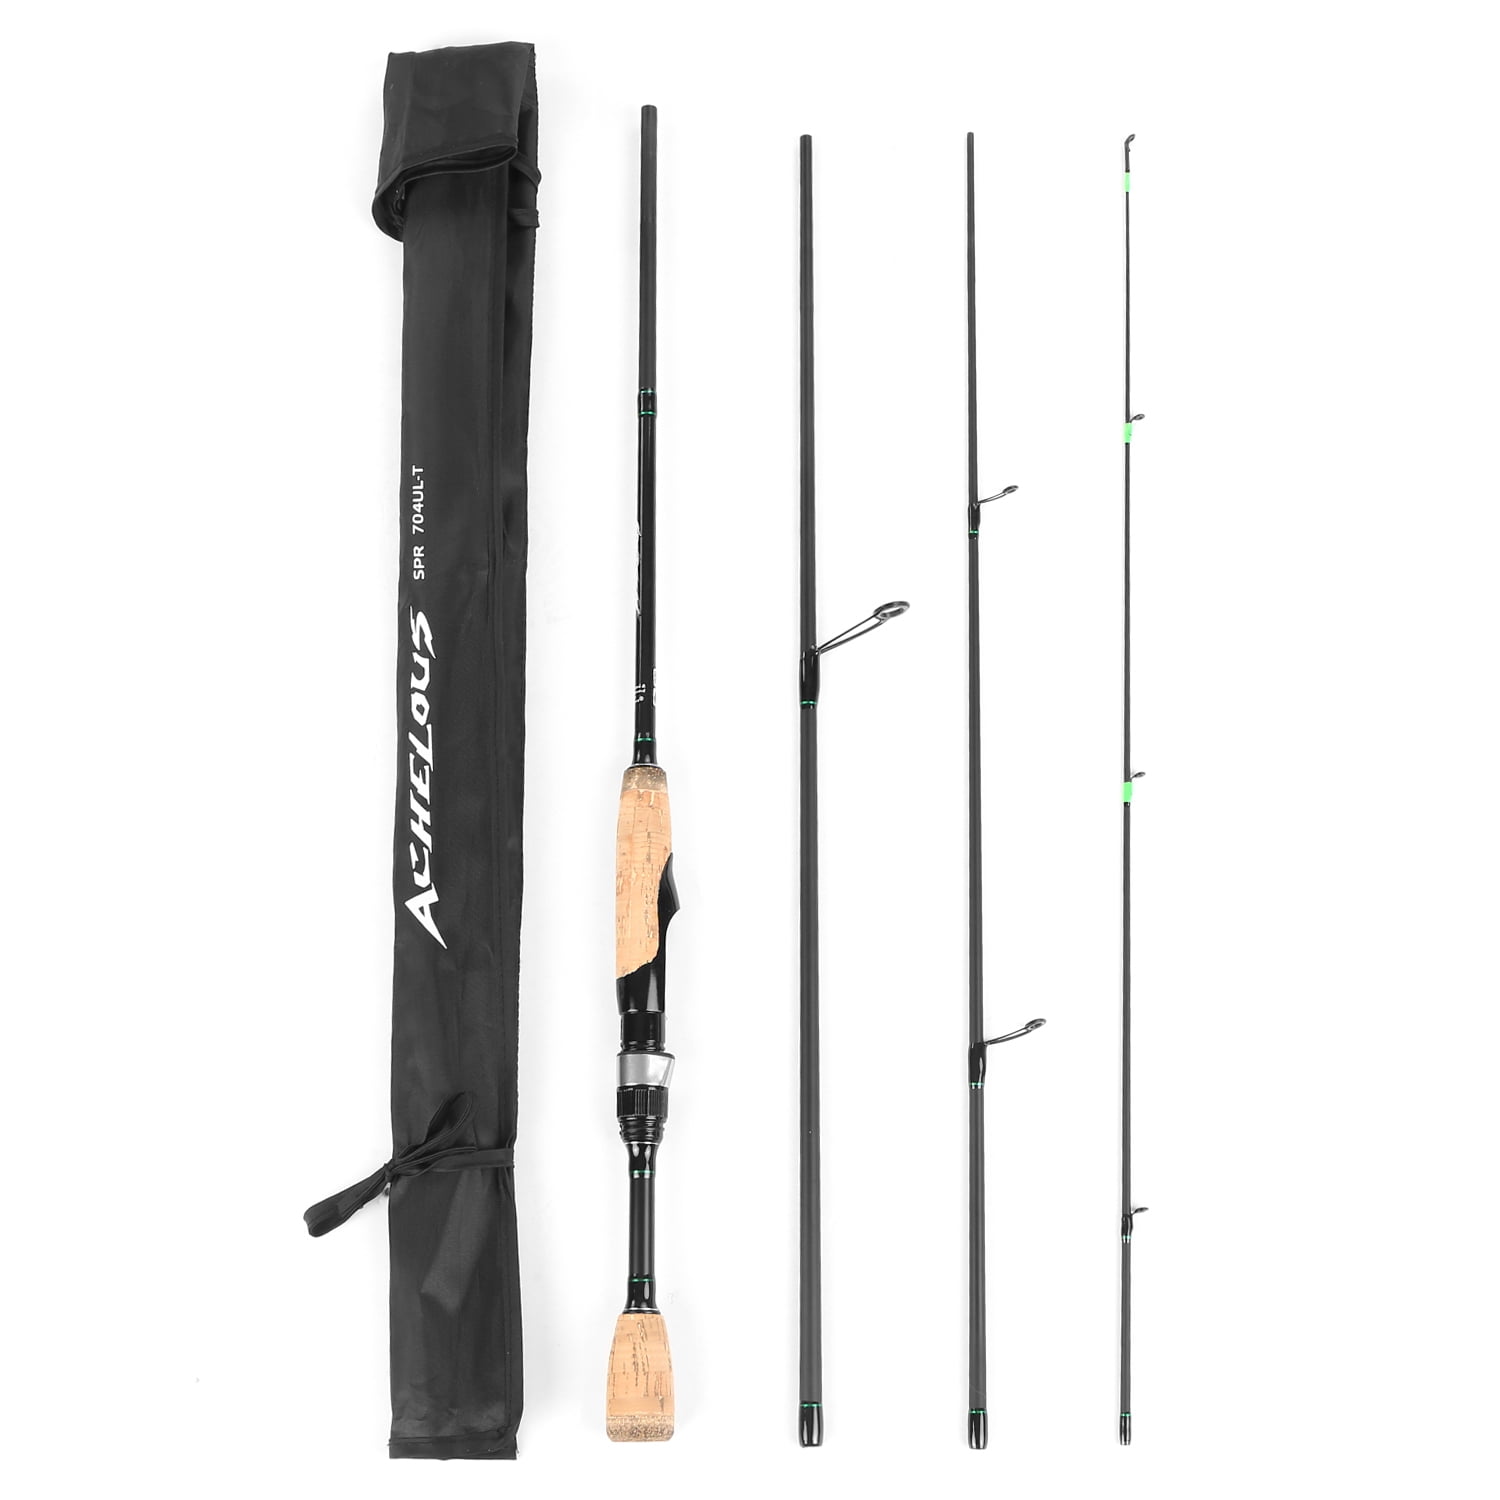 Details about   New Fenwick HMG Spinning Fishing Rod 1 Piece Multiple Sizes Power Action 